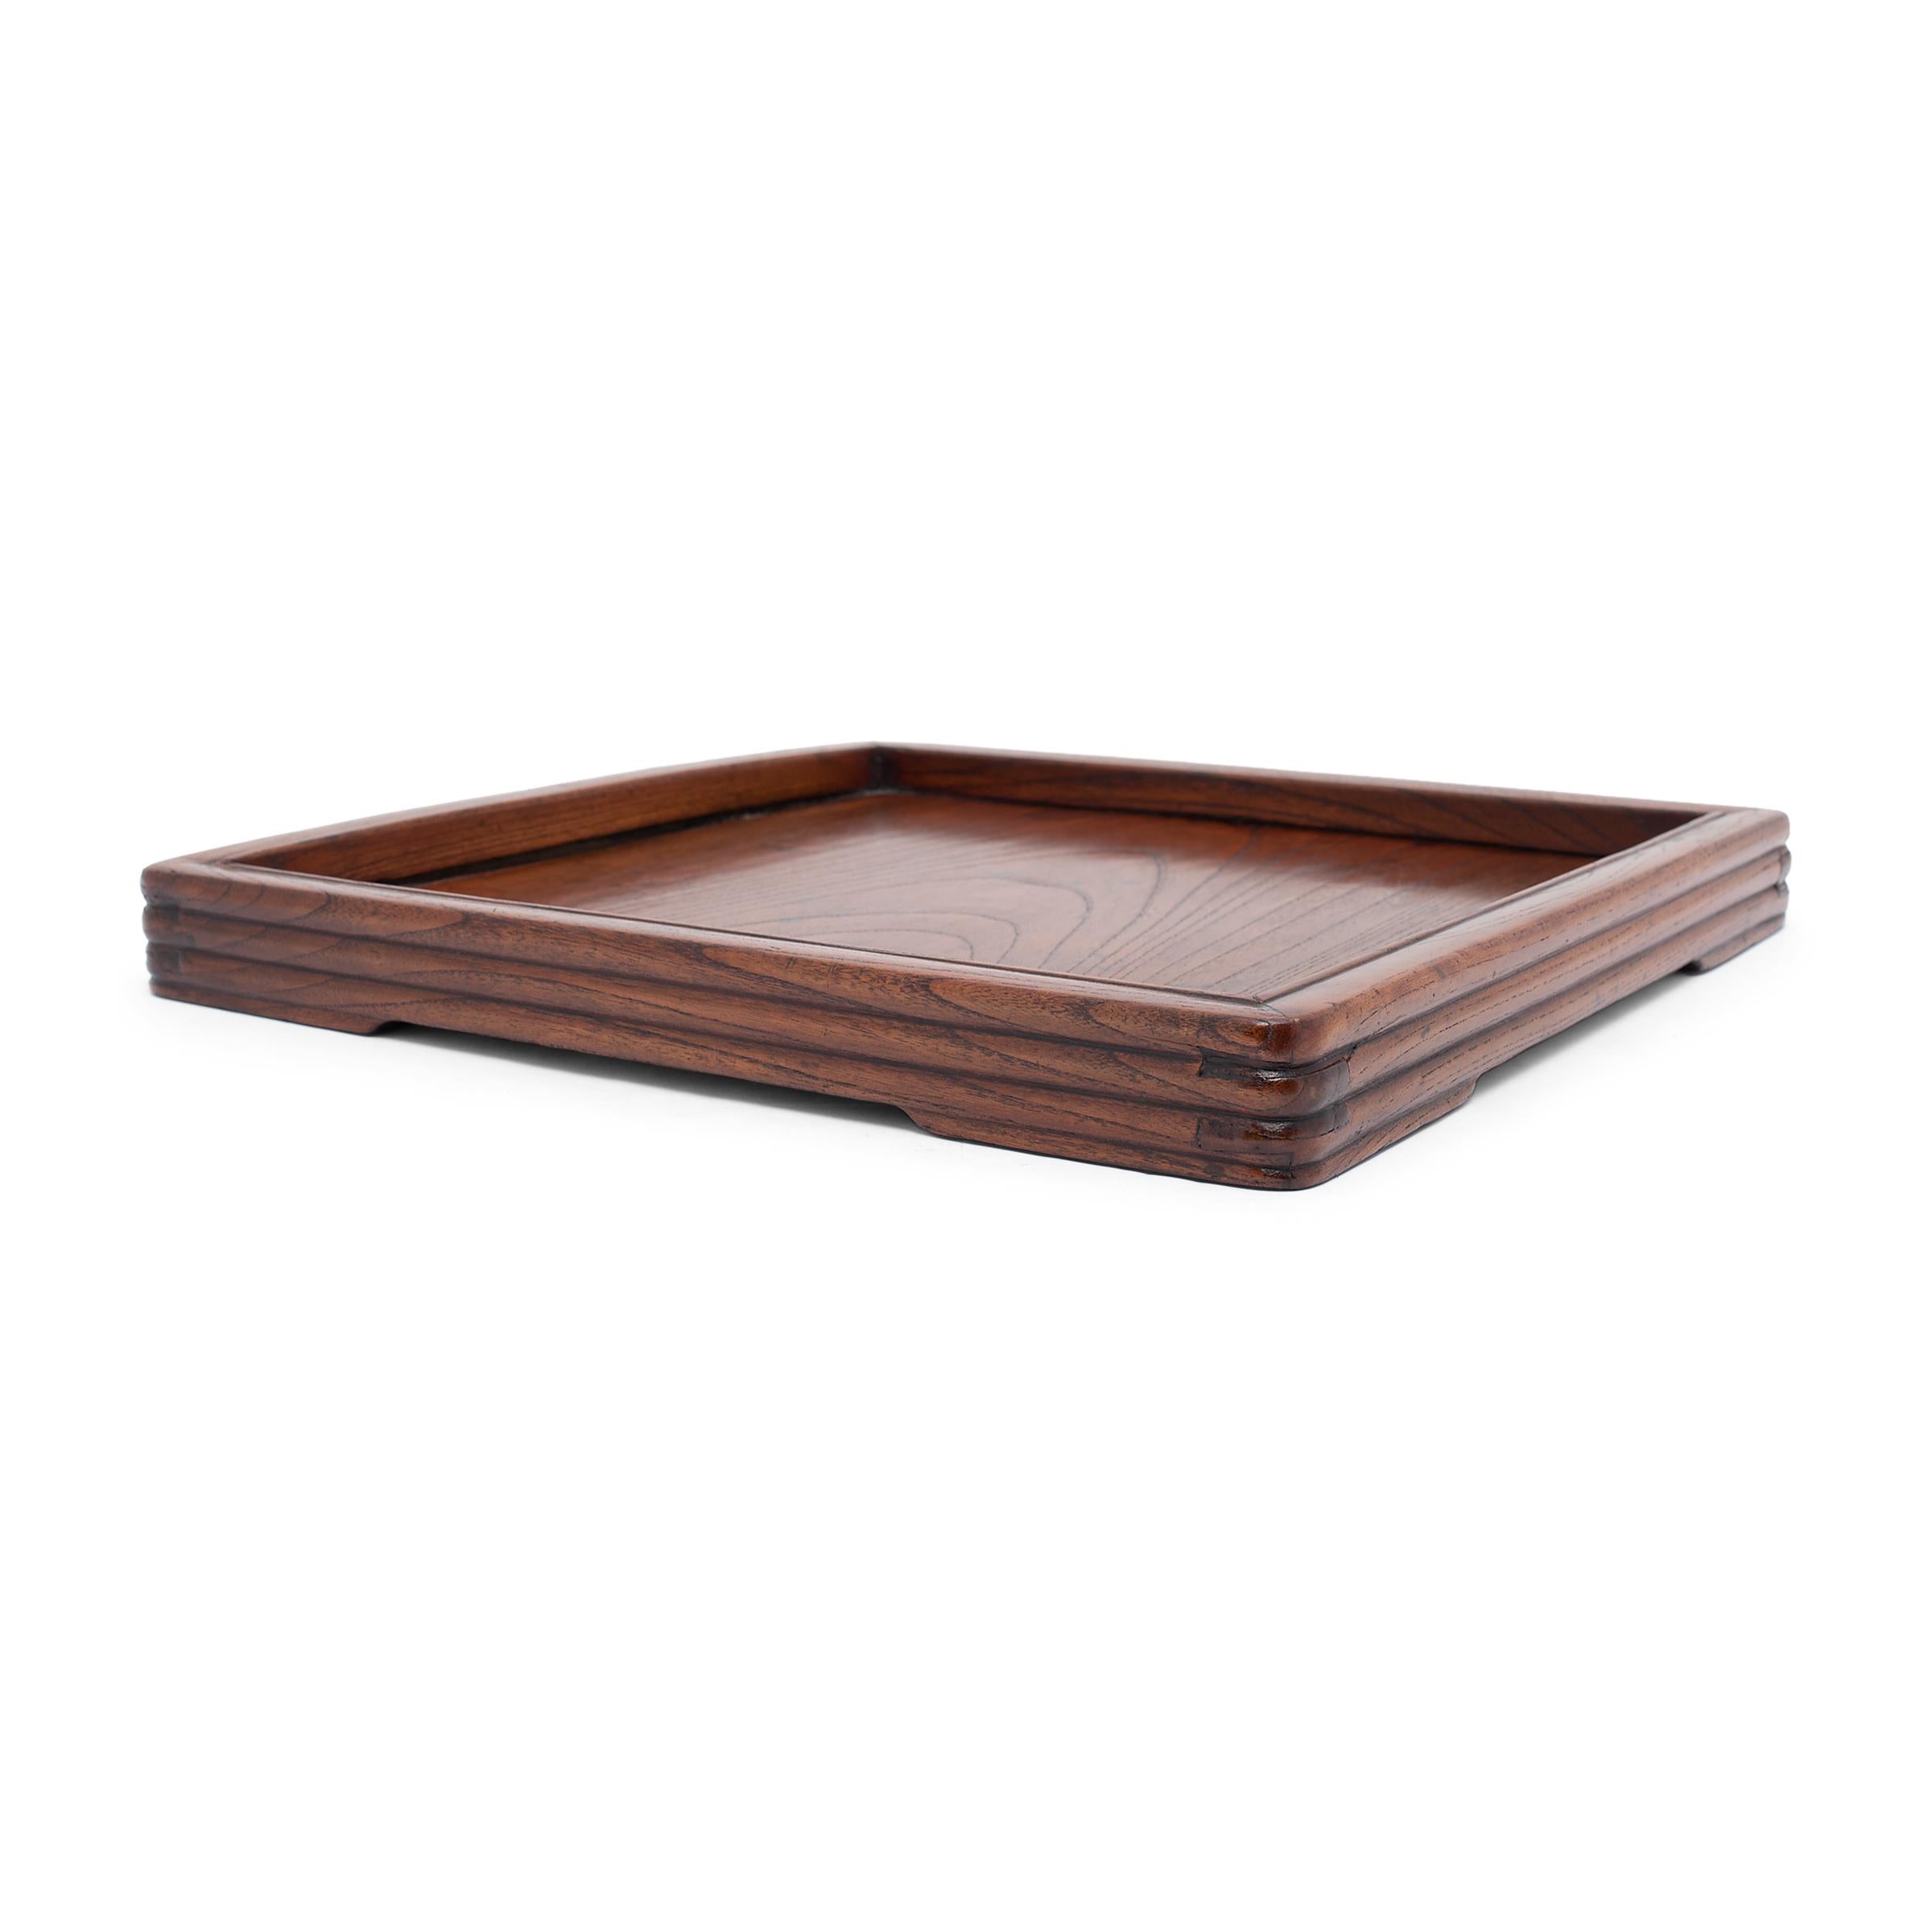 This elegant tea tray from the late 19th century owes its decorative appeal to the warm coloring and beautiful grain of northern elm (yumu). Once used to serve tea or hold scholarly implements, the shallow tray is minimally decorated, enclosed by a